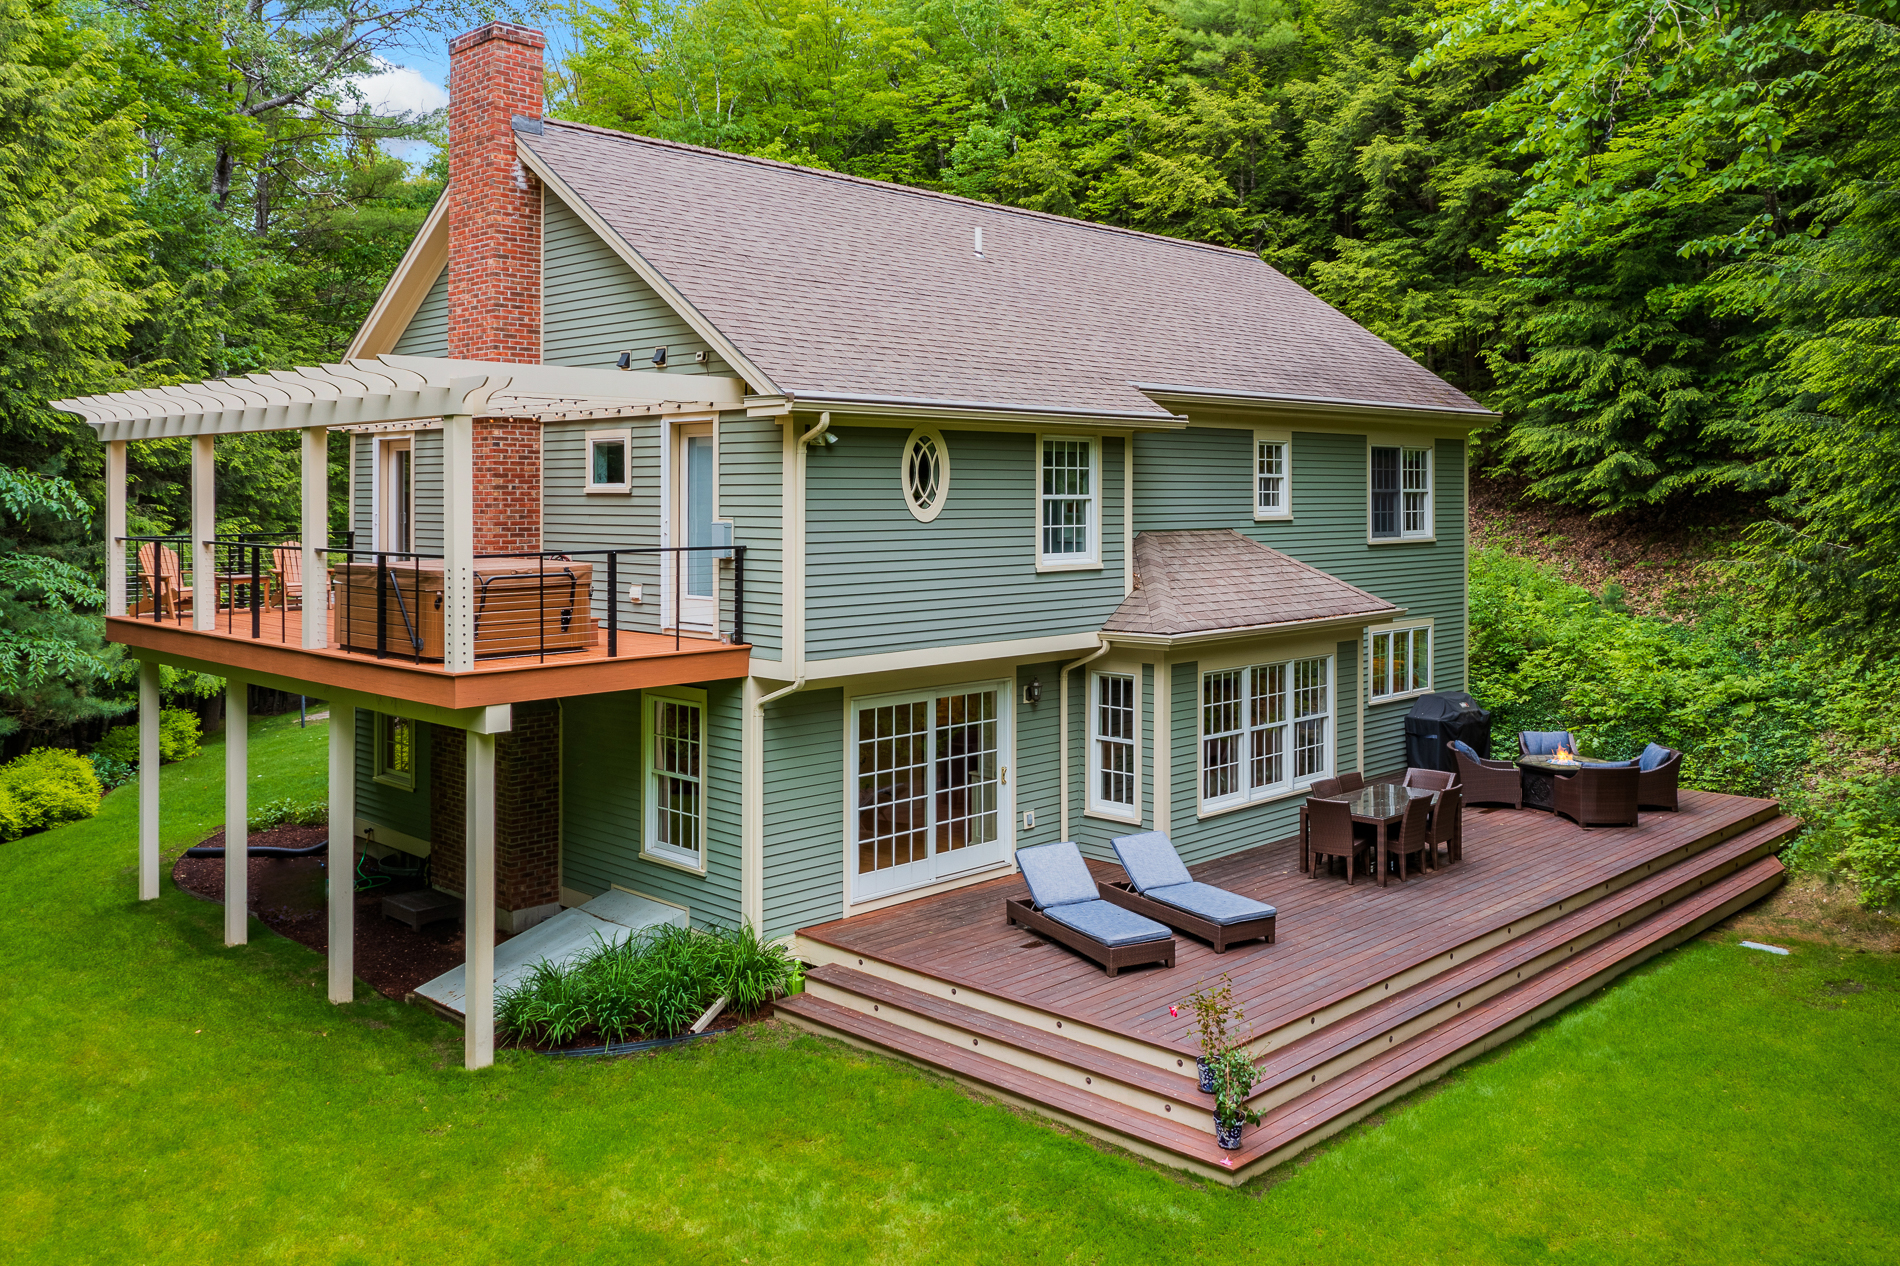 Large green home with off-white trim and second-story deck, with a finished basement that leads to a deck in the backyard.